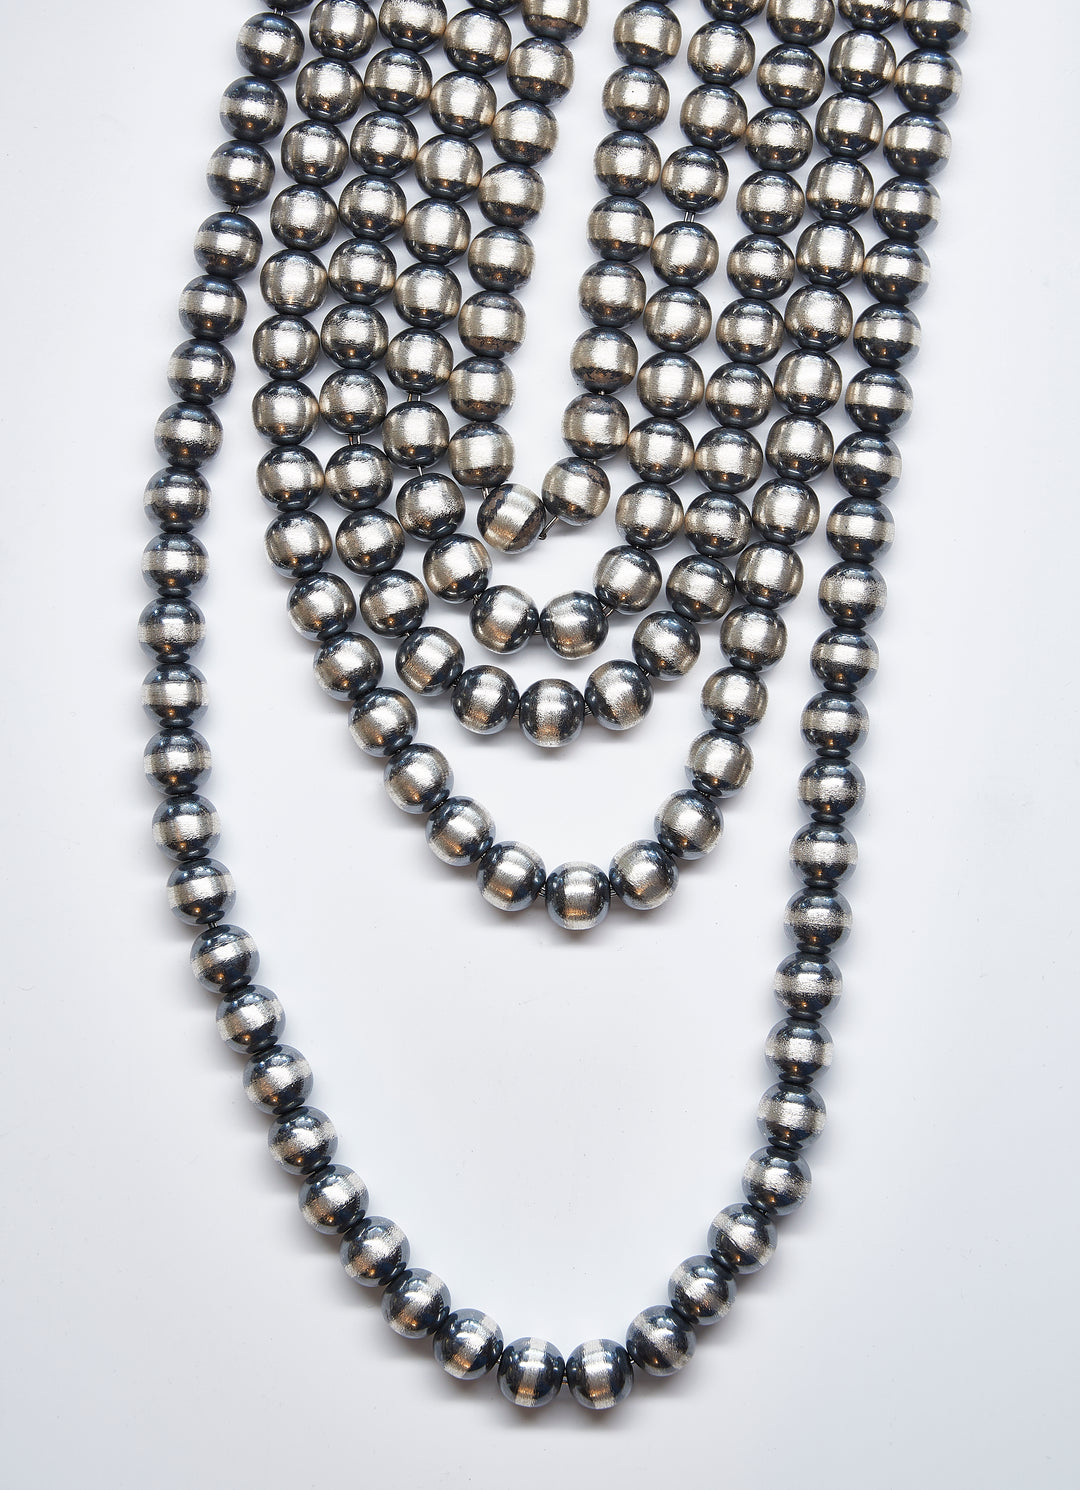 Oxidized Silver Bead Necklace